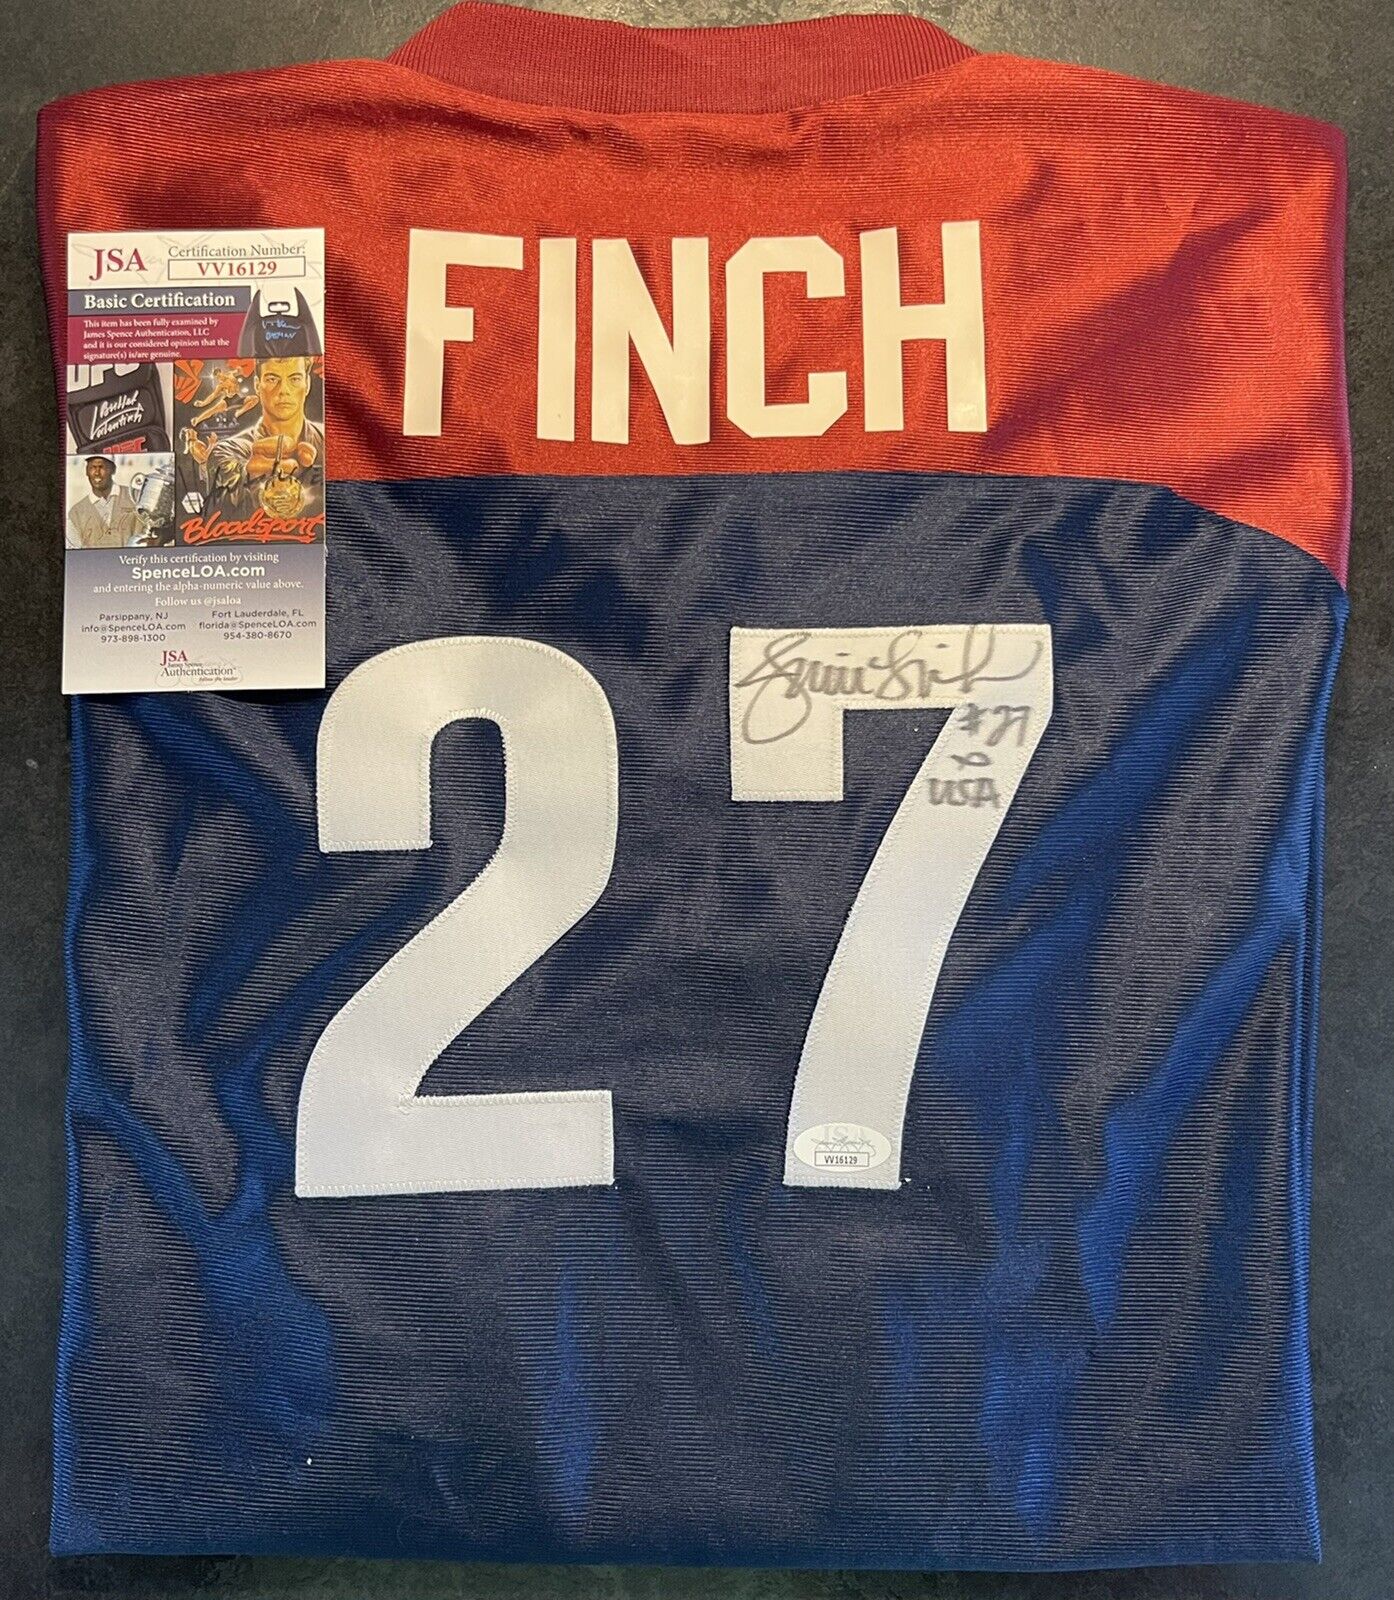 AUTOGRAPH SIGNED High material USA JERSEY JENNIE JSA AUTH AUTO FINCH Outlet ☆ Free Shipping WITH